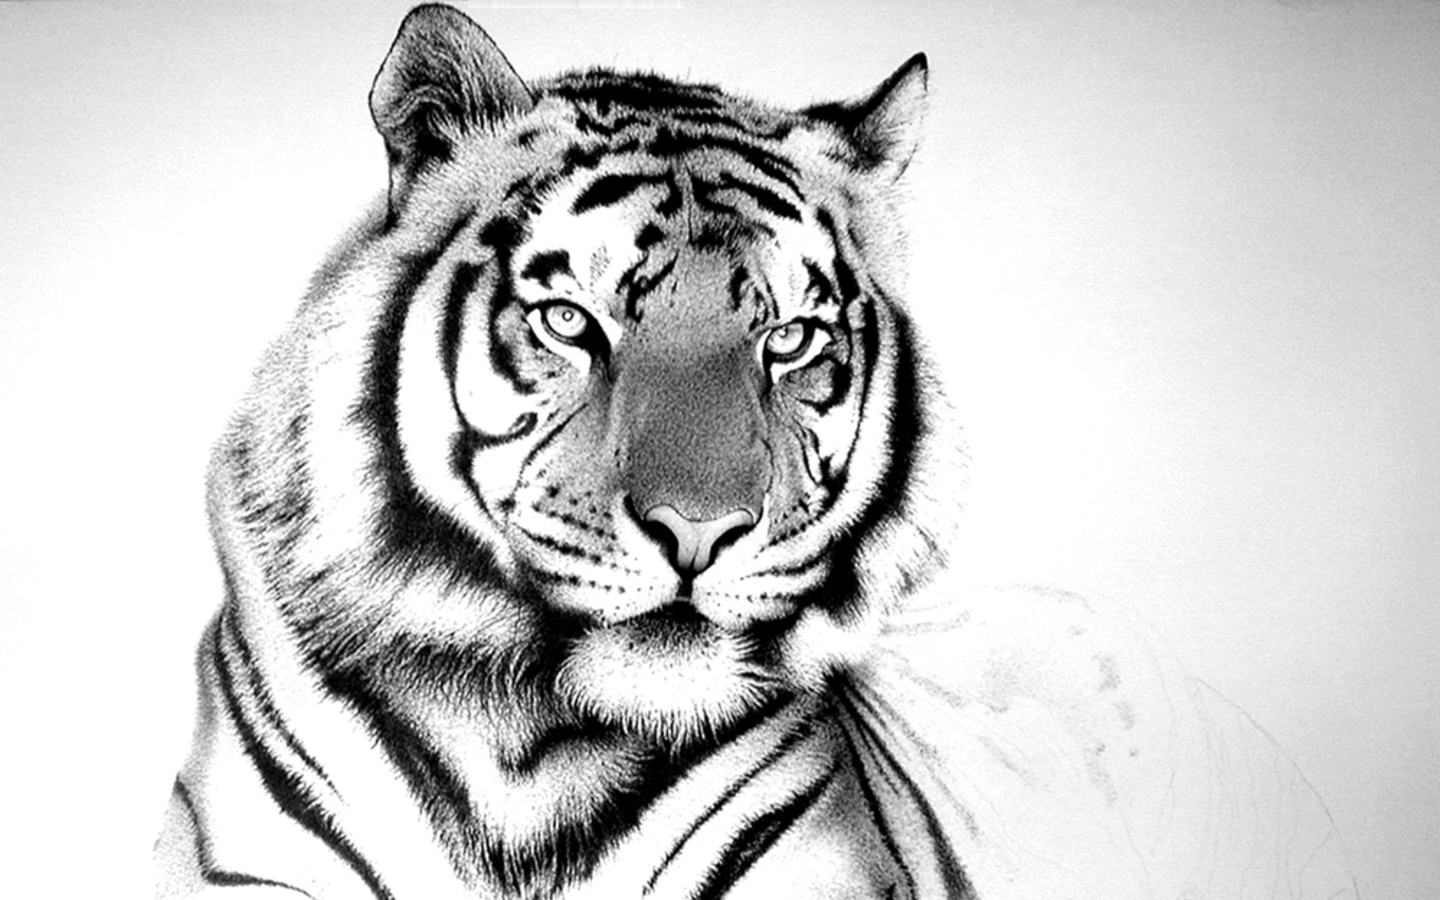 Cool White Tigers Wallpapers Desktop Background - Tiger Pen And Ink Drawing - HD Wallpaper 